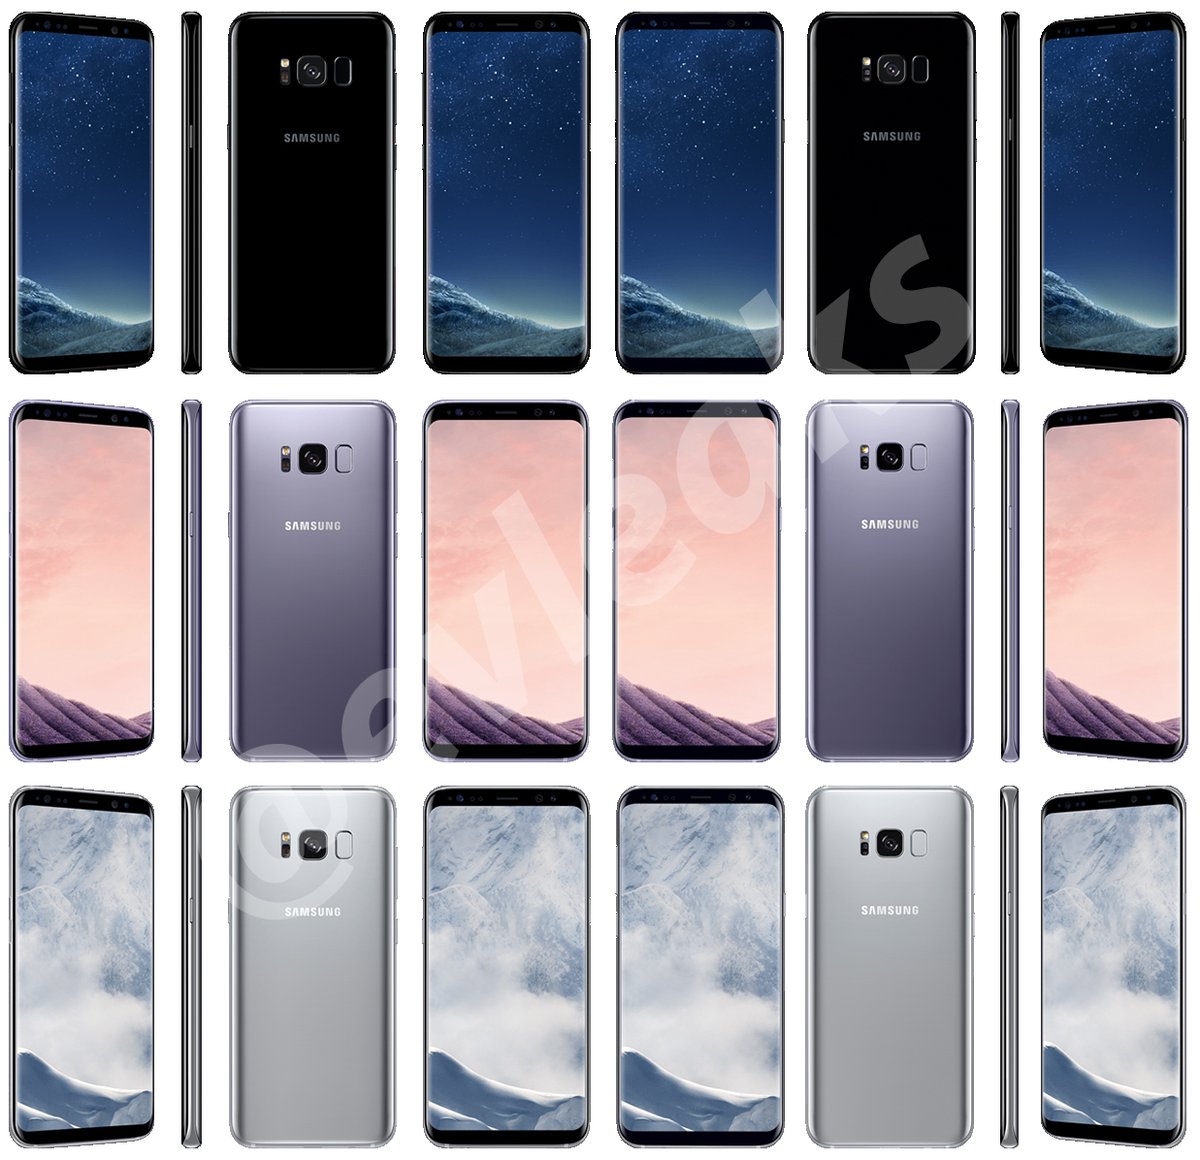 Latest Leaked Galaxy S8 And Galaxy S8 Plus Press Render Coloring Wallpapers Download Free Images Wallpaper [coloring436.blogspot.com]